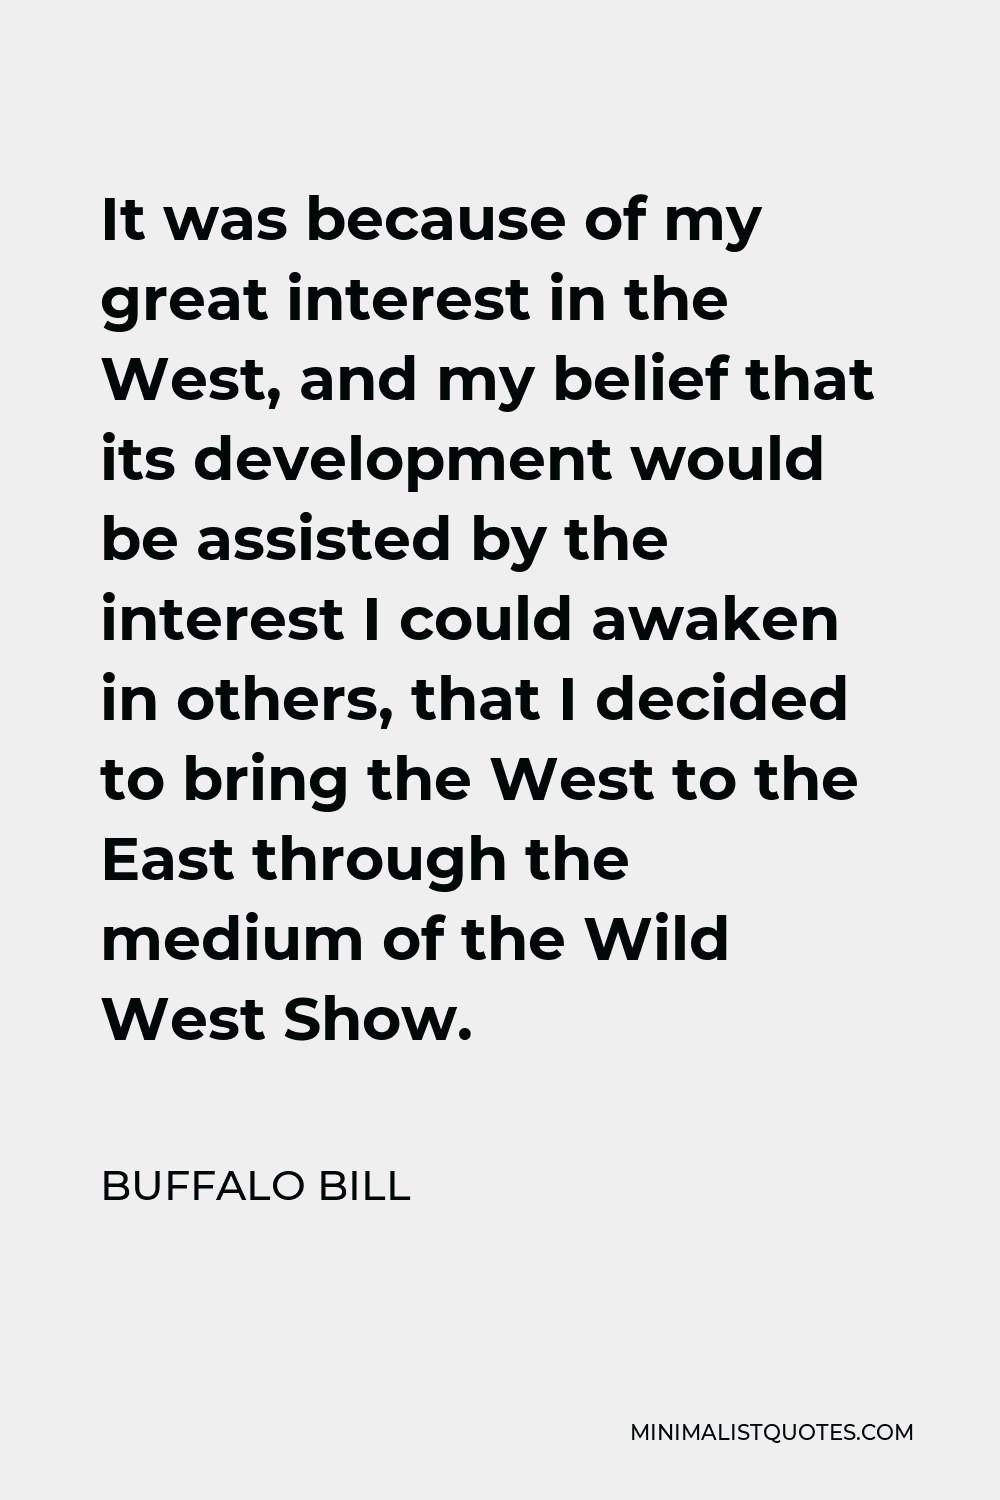 Buffalo Bill Quote - It was because of my great interest in the West, and my belief that its development would be assisted by the interest I could awaken in others, that I decided to bring the West to the East through the medium of the Wild West Show.